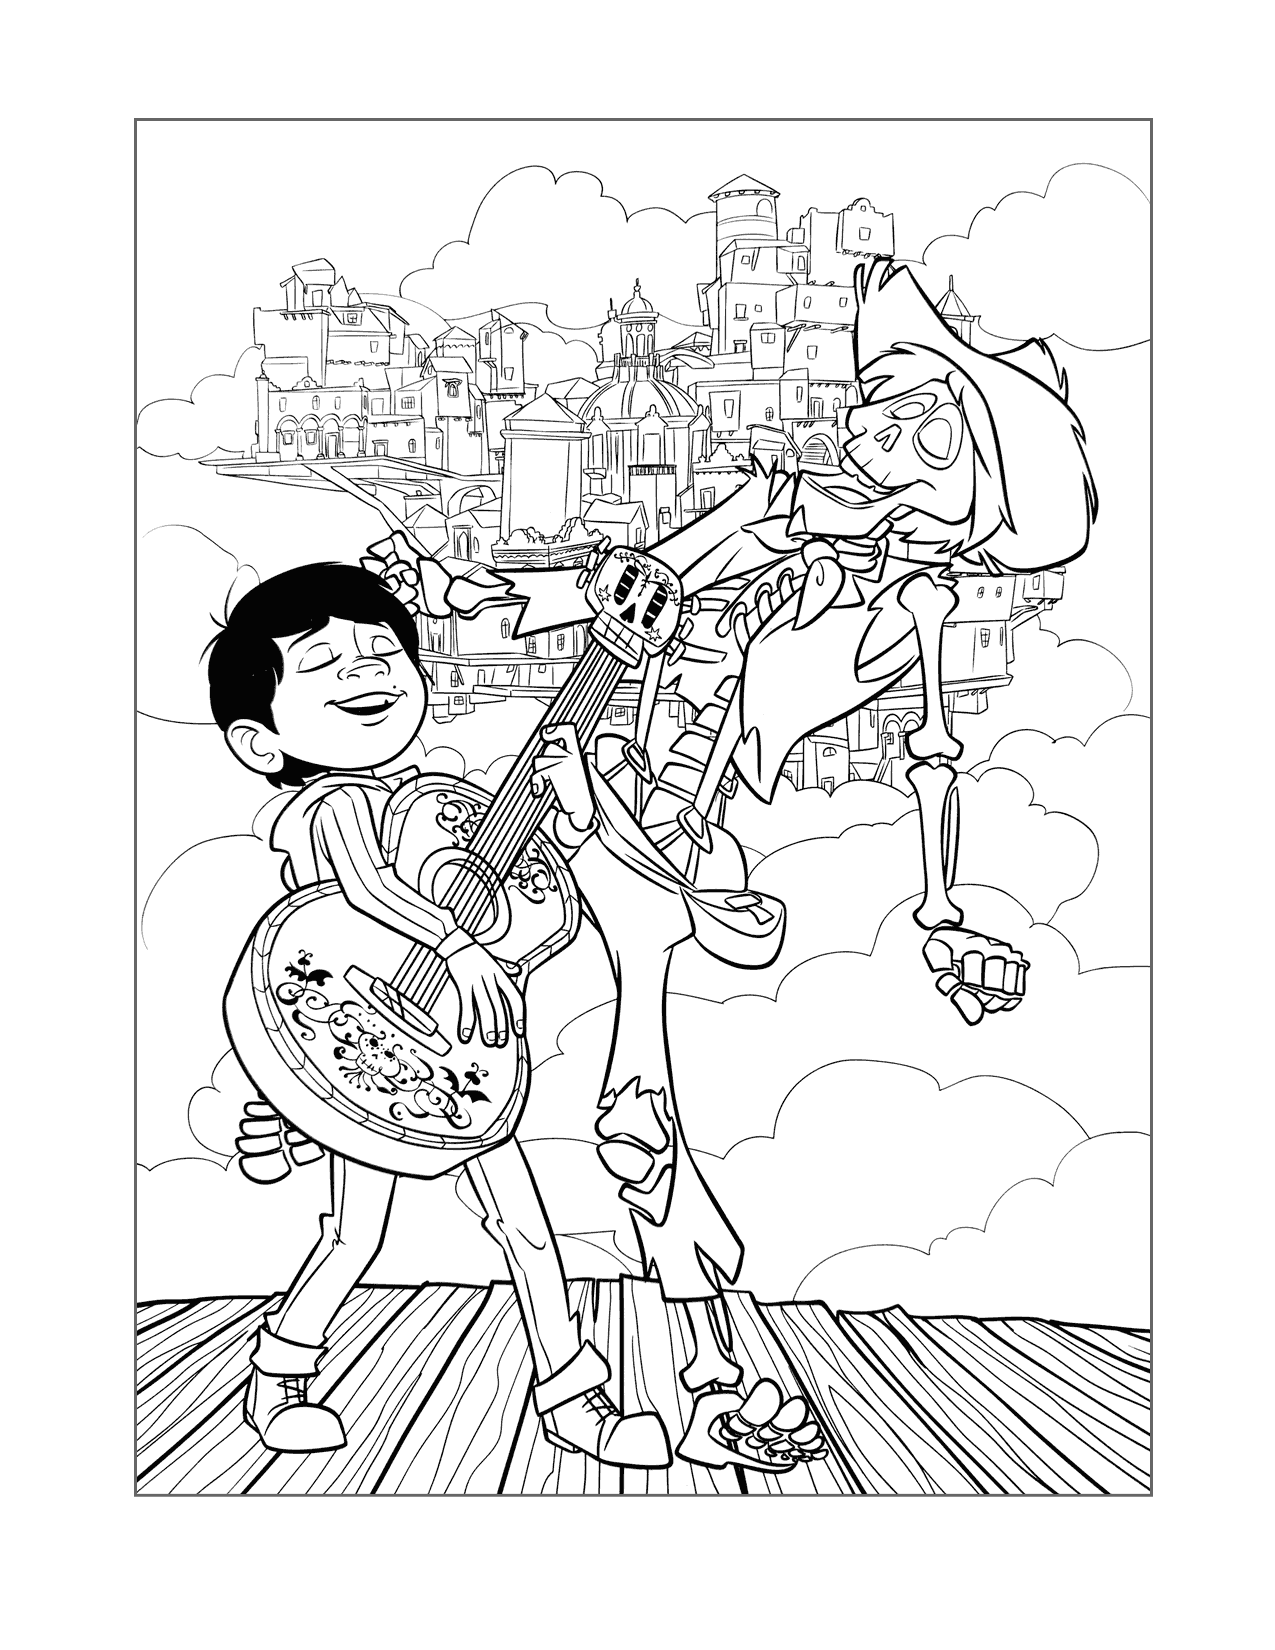 Coco Movie Coloring Pages